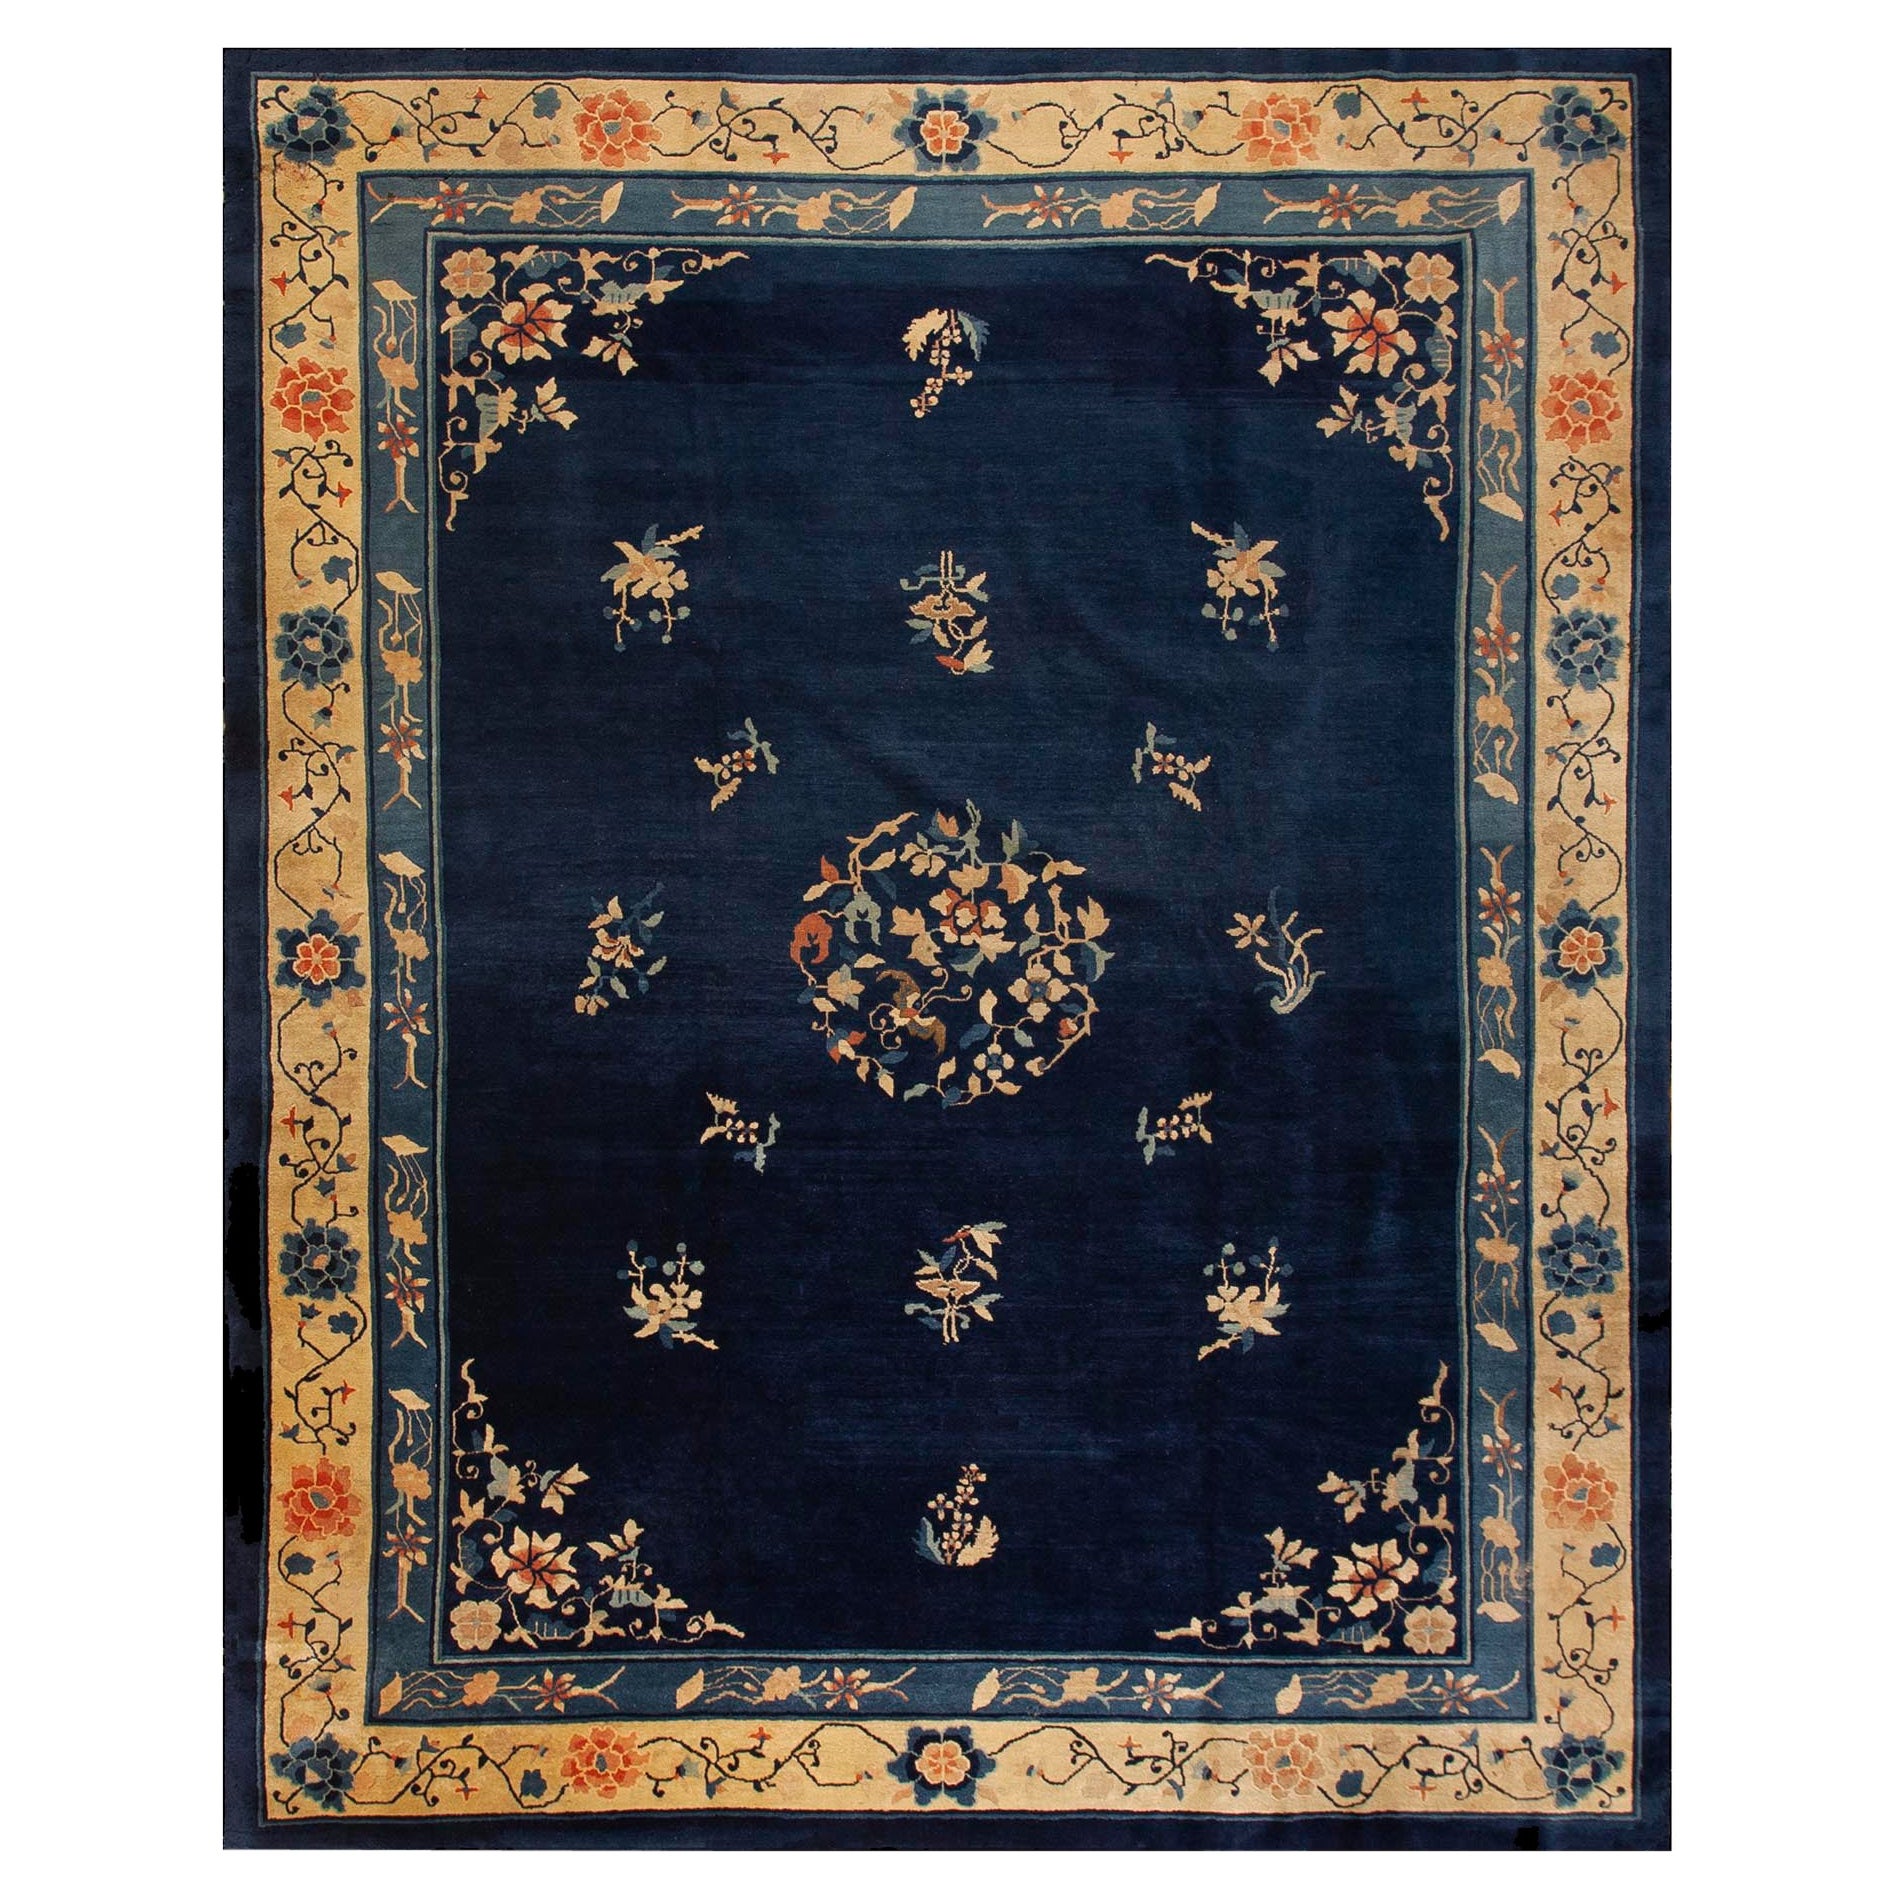 Antique Chinese Peking Rug 9' 4" x 11' 9" For Sale